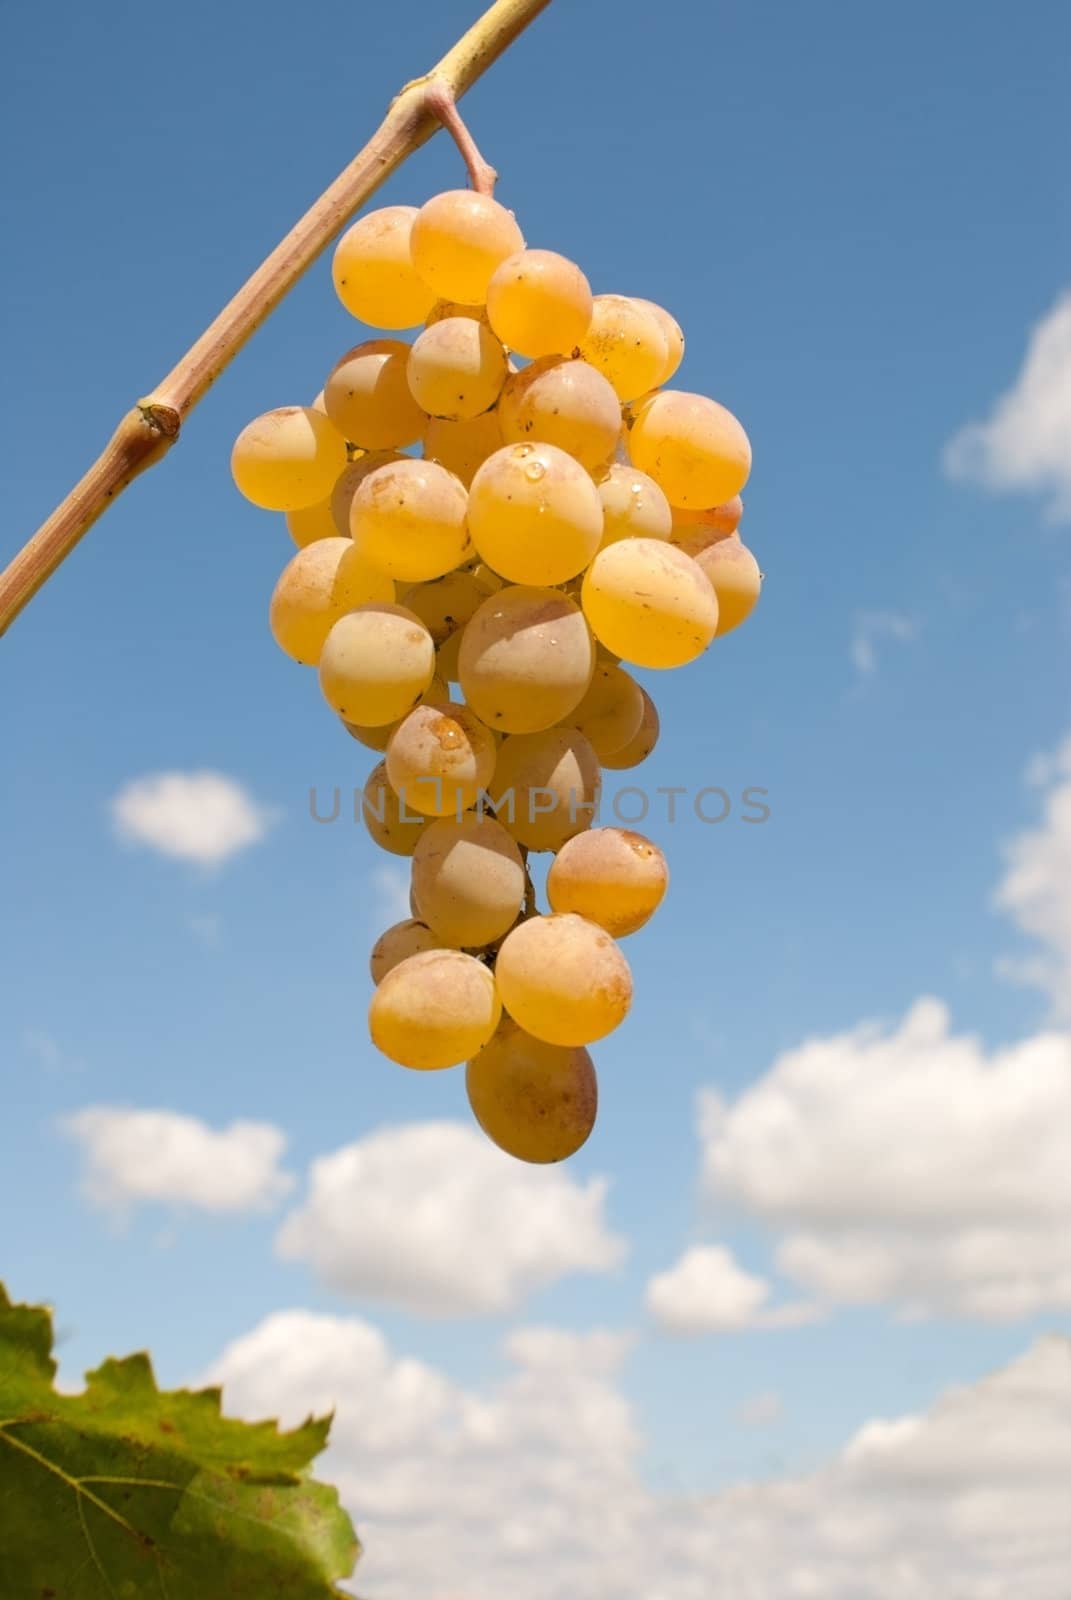 Ripe bunch of grapes against blue skyRipe bunch of grapes against blue sky by AndreyKr